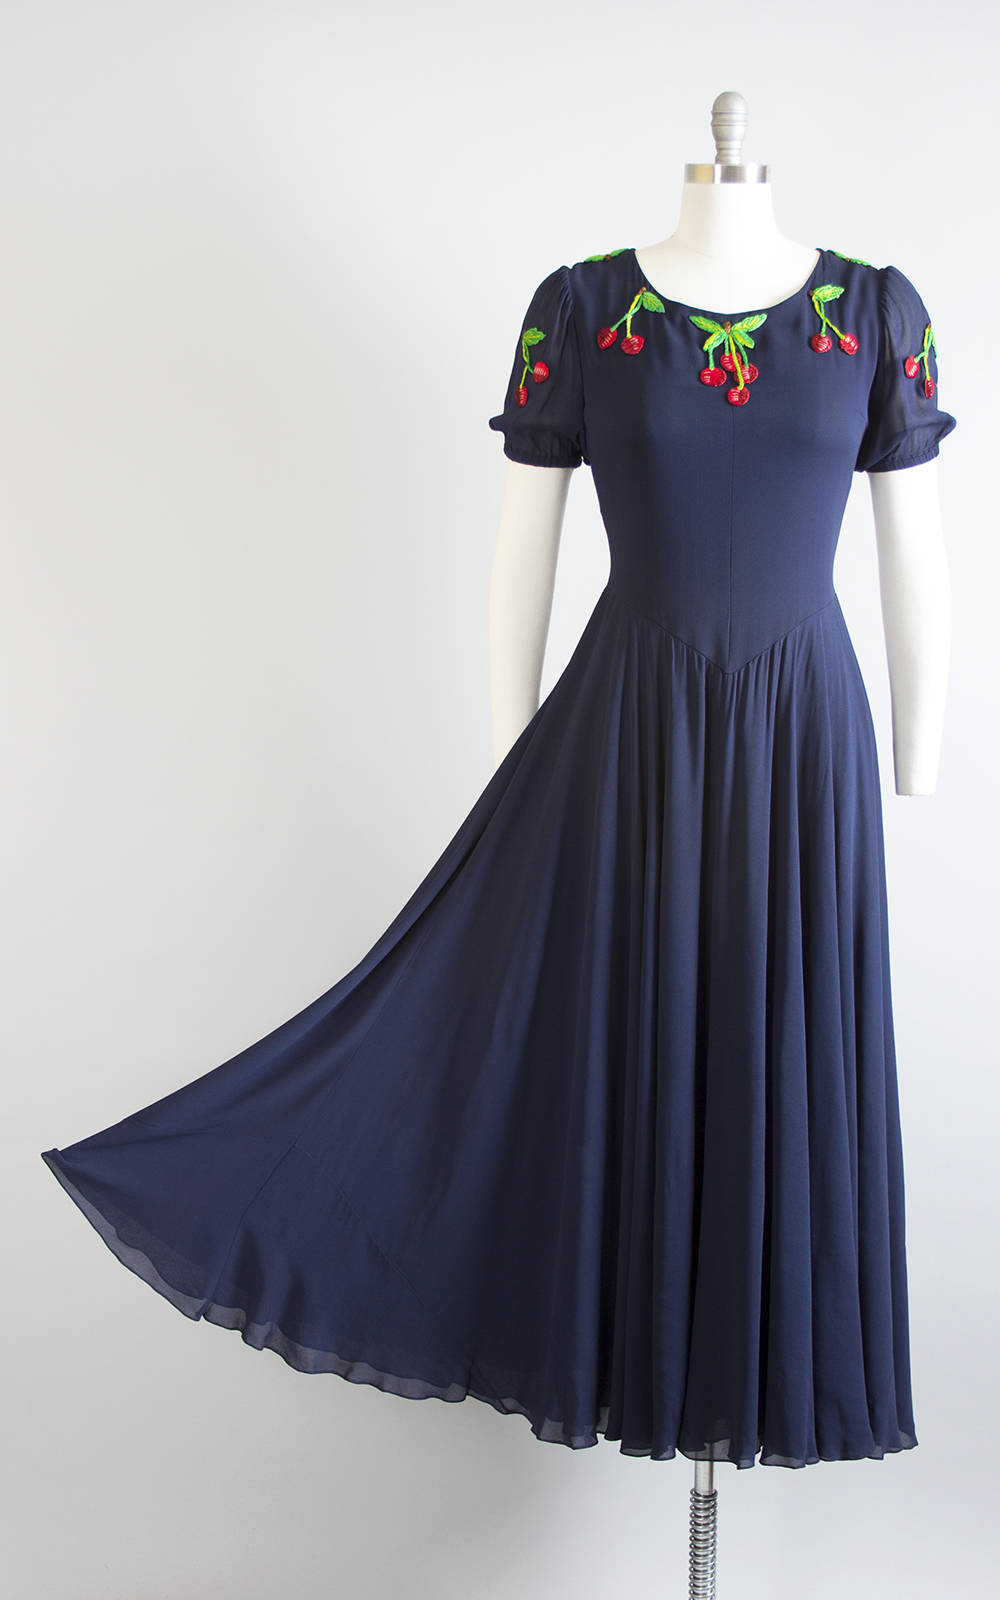 Vintage 1970s Dress | 70s VALENTINO Embroidered Cherries Rayon Chiffon Navy Blue Party Dress Circle Skirt Maxi Evening Gown (medium)